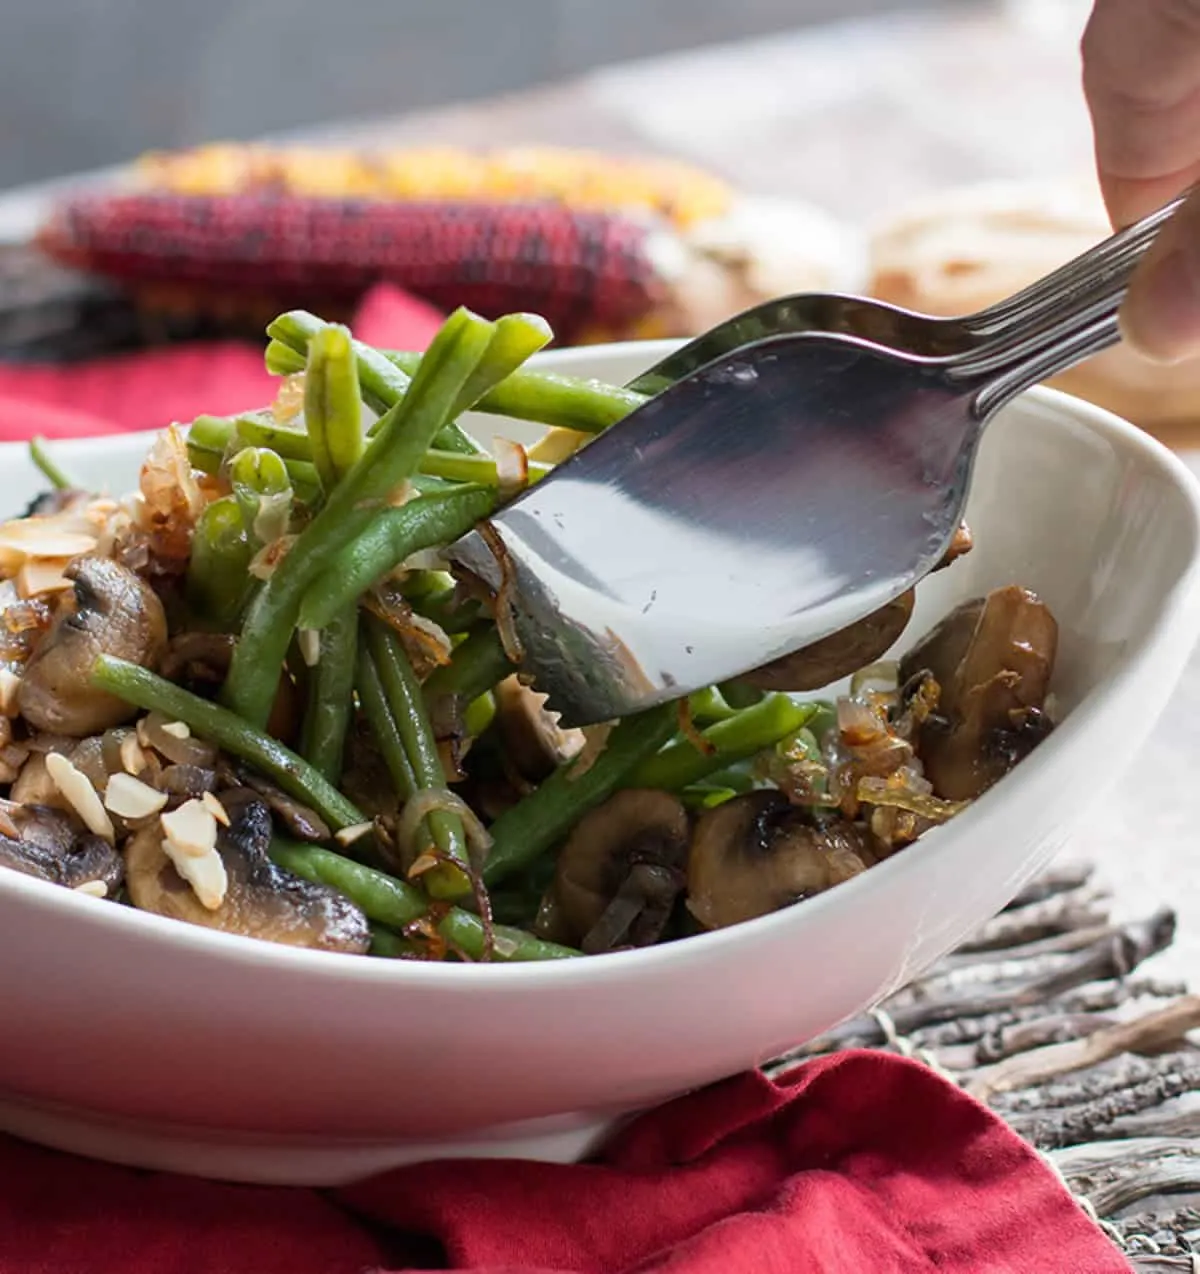 One Pan Green Beans, Mushrooms and Shallots. The flavors of traditional green bean casserole in a lighter, fresher tasting side dish. One pan easy!